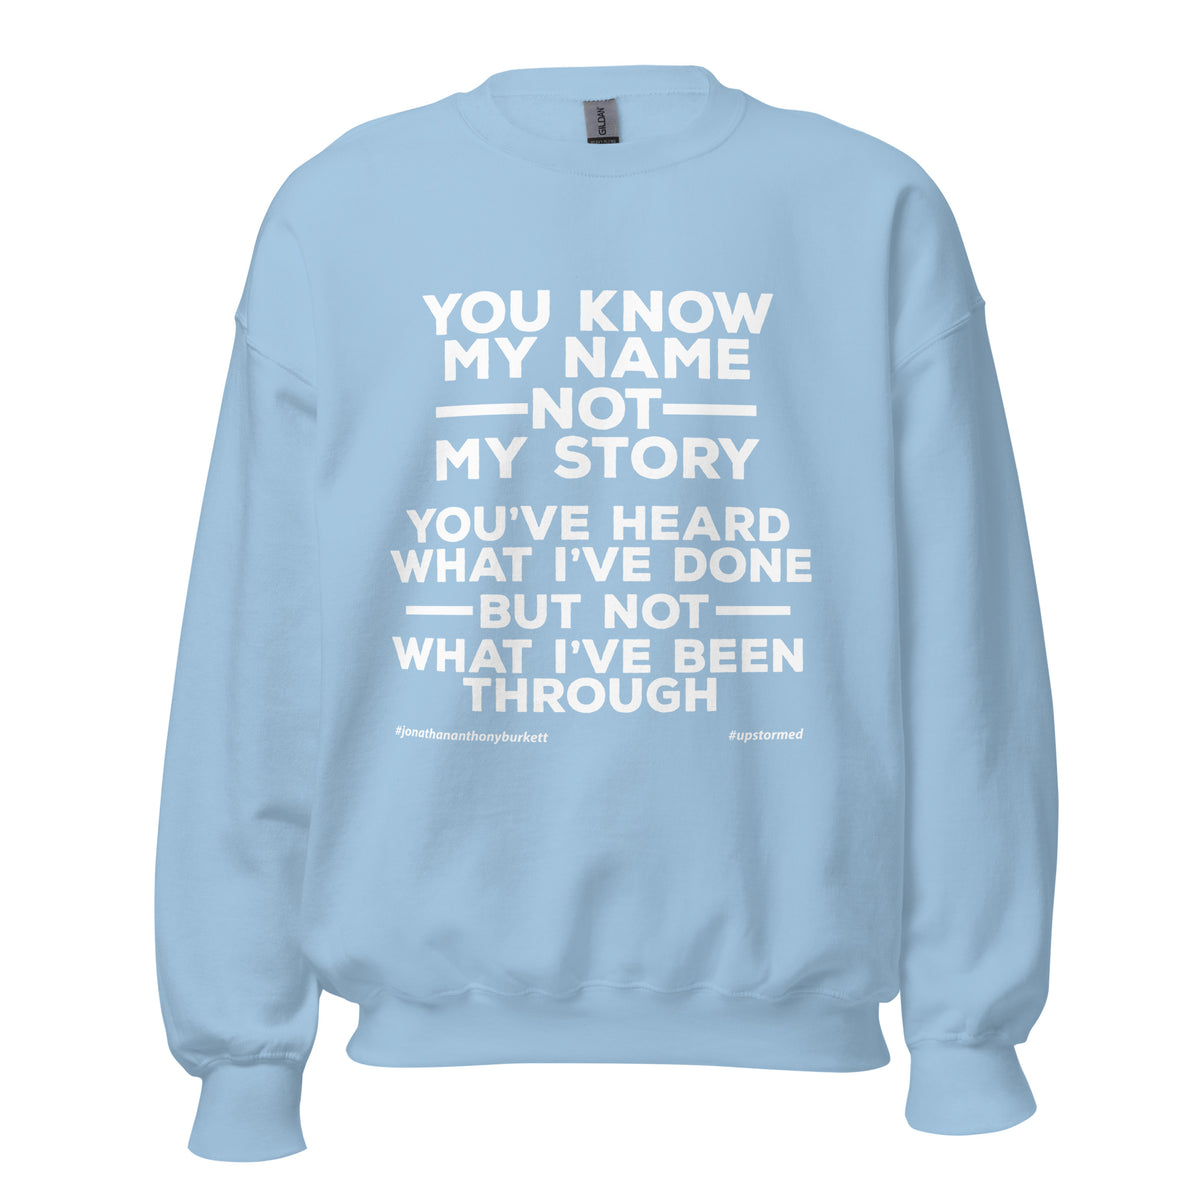 You Know My Name Not My Story Upstormed Sweatshirt